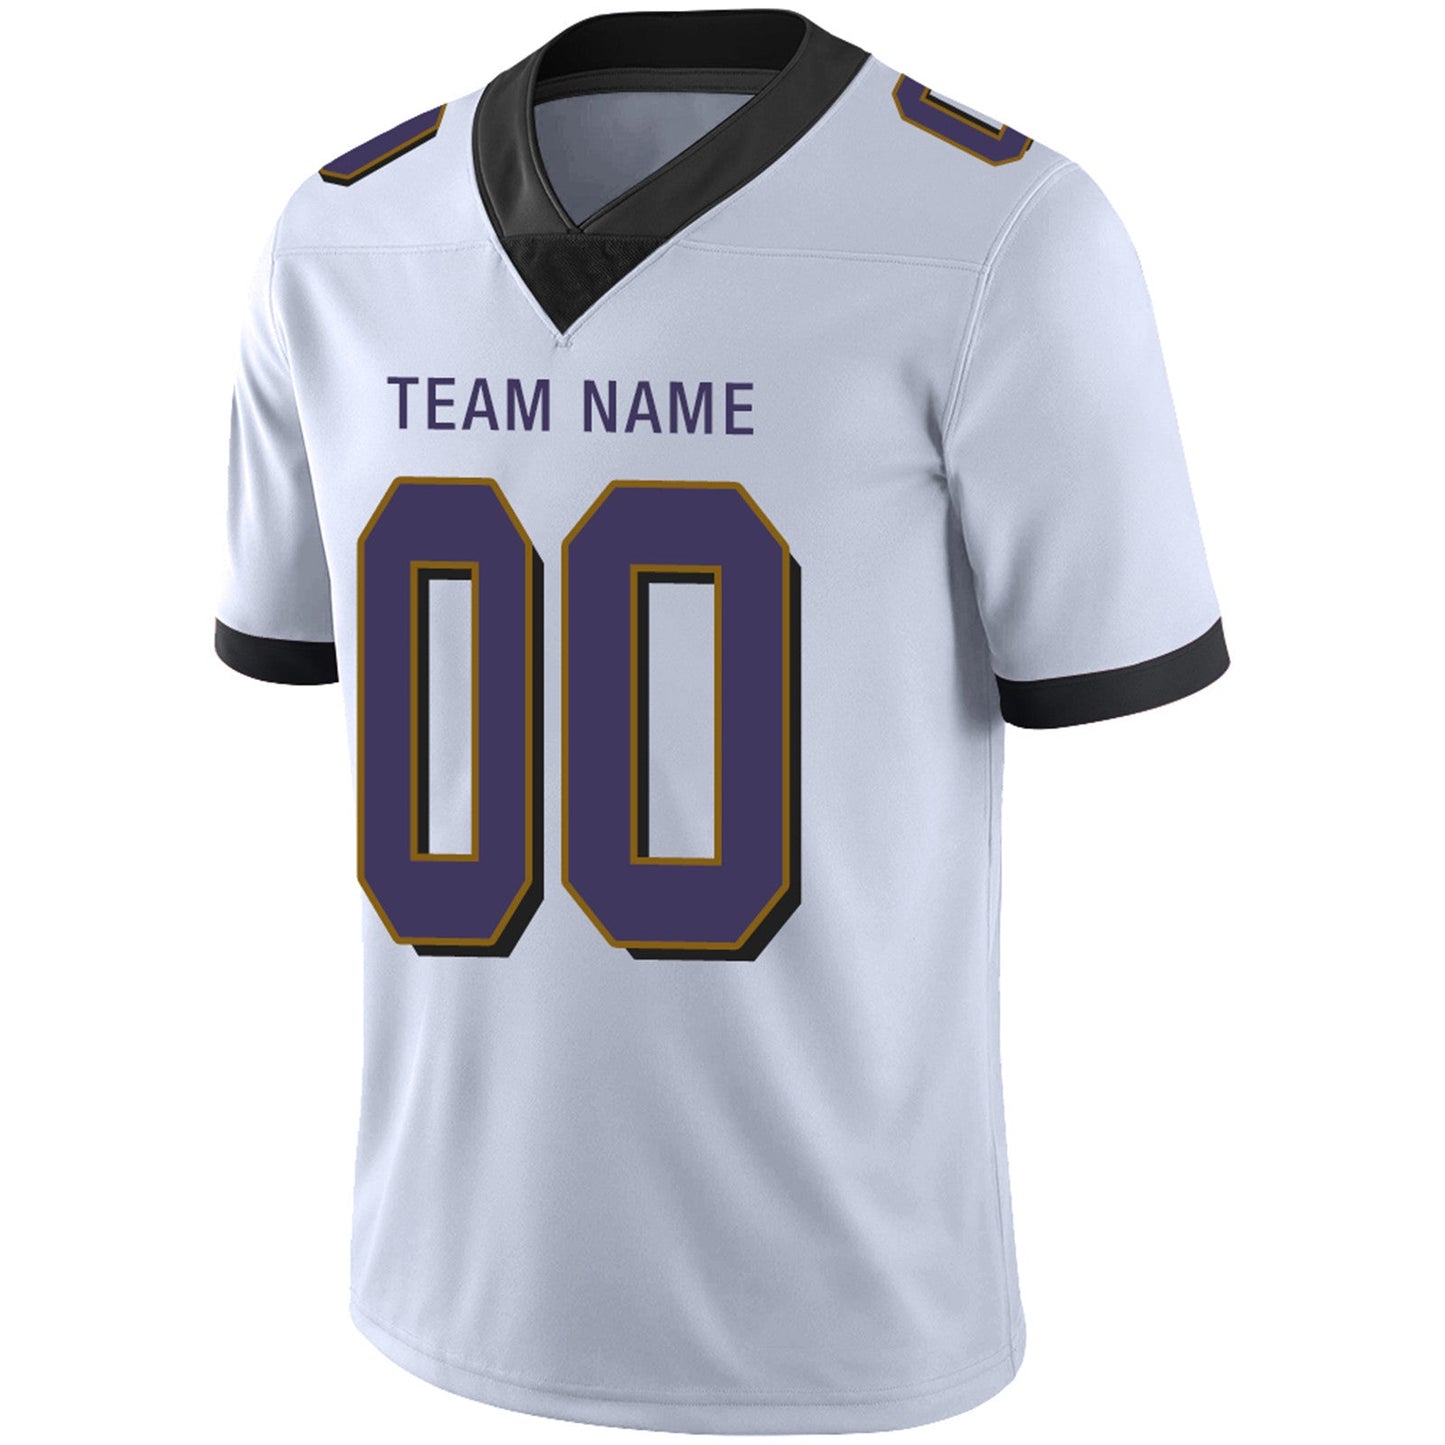 Custom B.Ravens Football JerseyS Team Player or Personalized Design Your Own Name for Men's Women's Youth Jerseys Purple